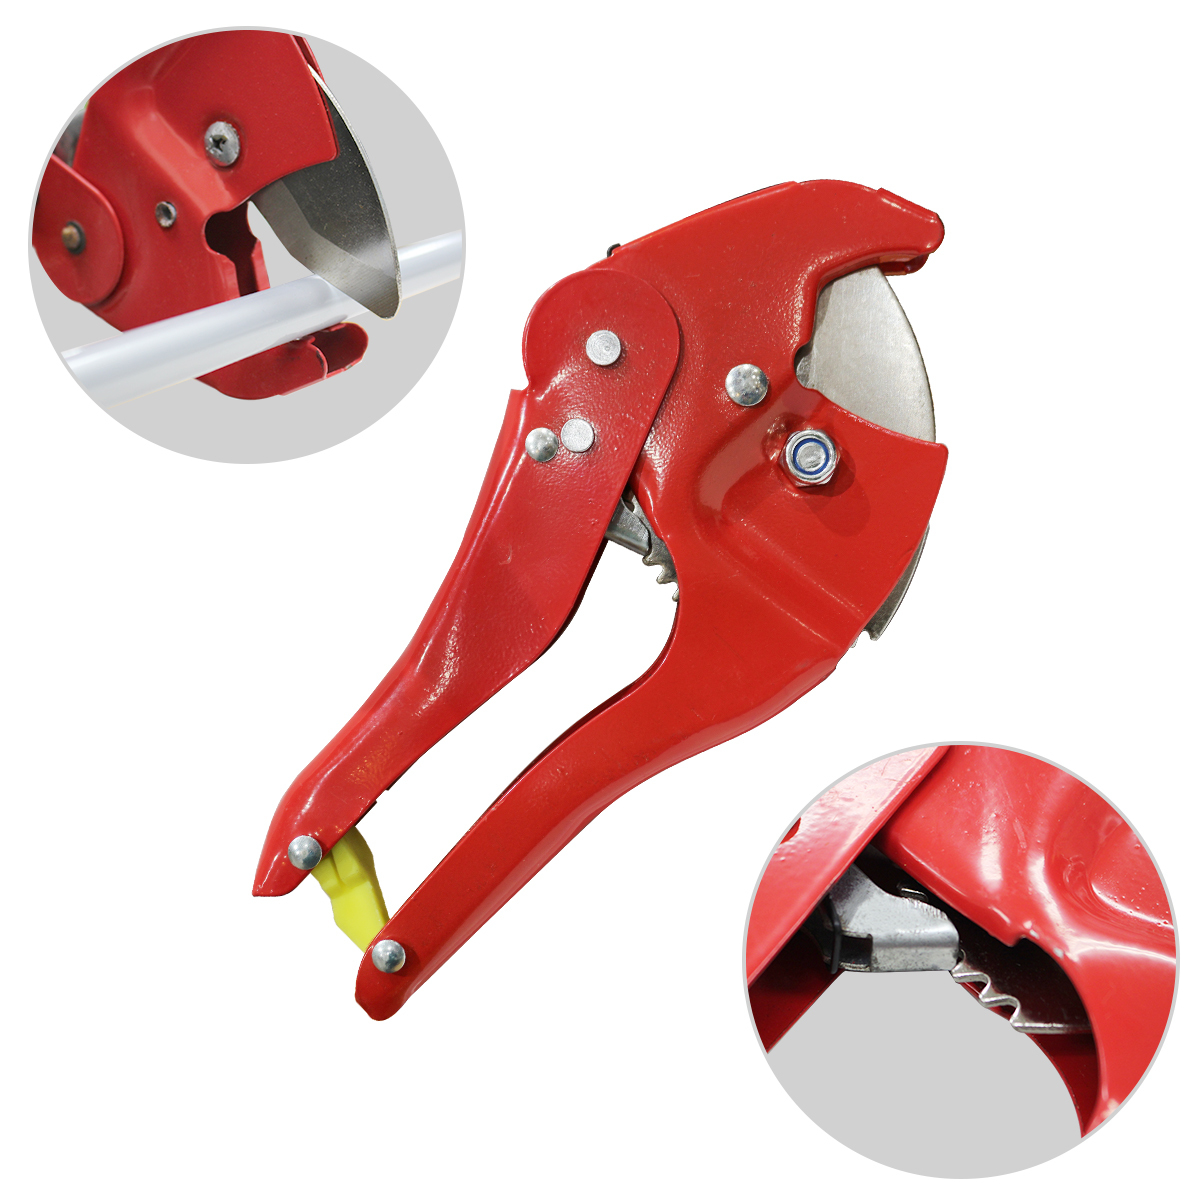  ratchet type PVC tube cutter PVC cutter pipe cutter stopper attaching piping processing 32mm correspondence embi cutter PVC cutter 